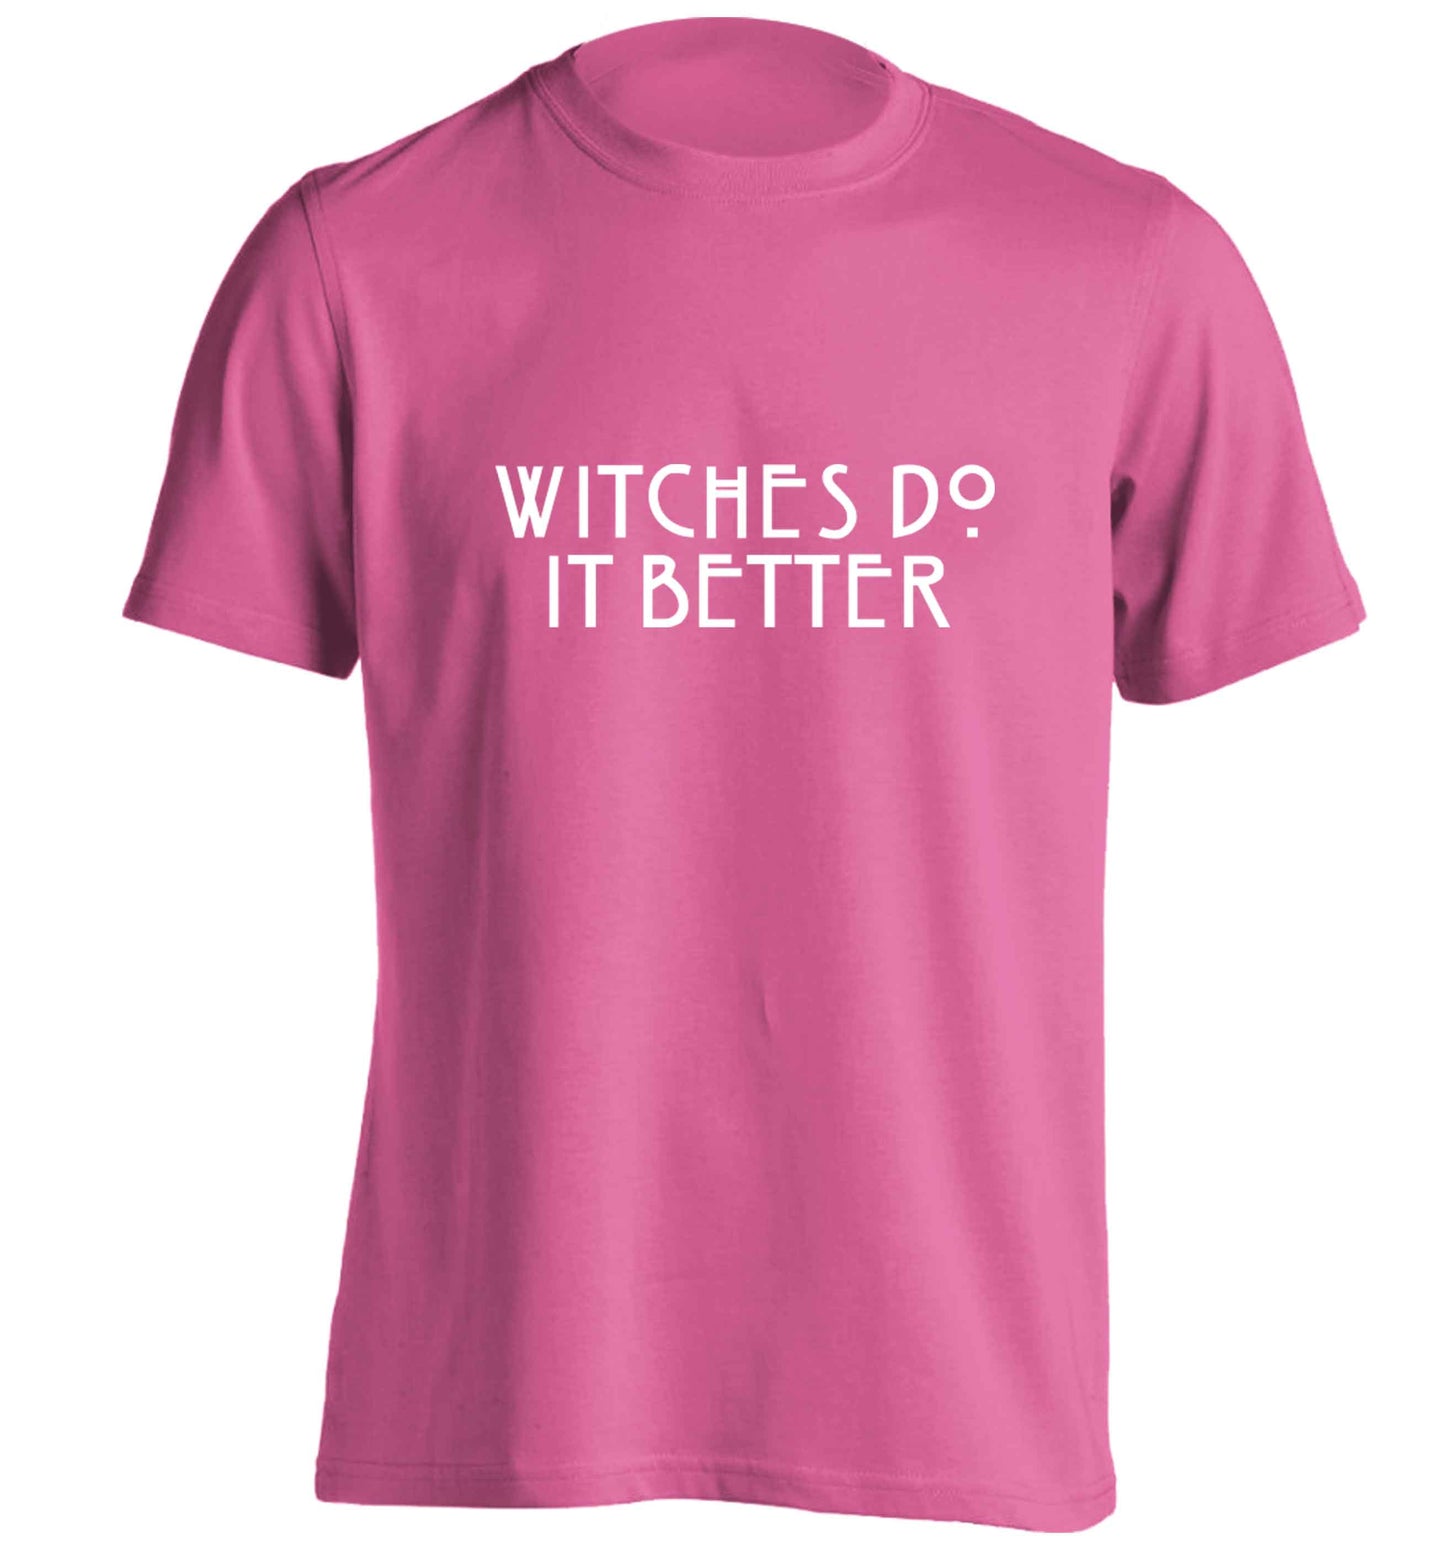 Witches do it better adults unisex pink Tshirt 2XL